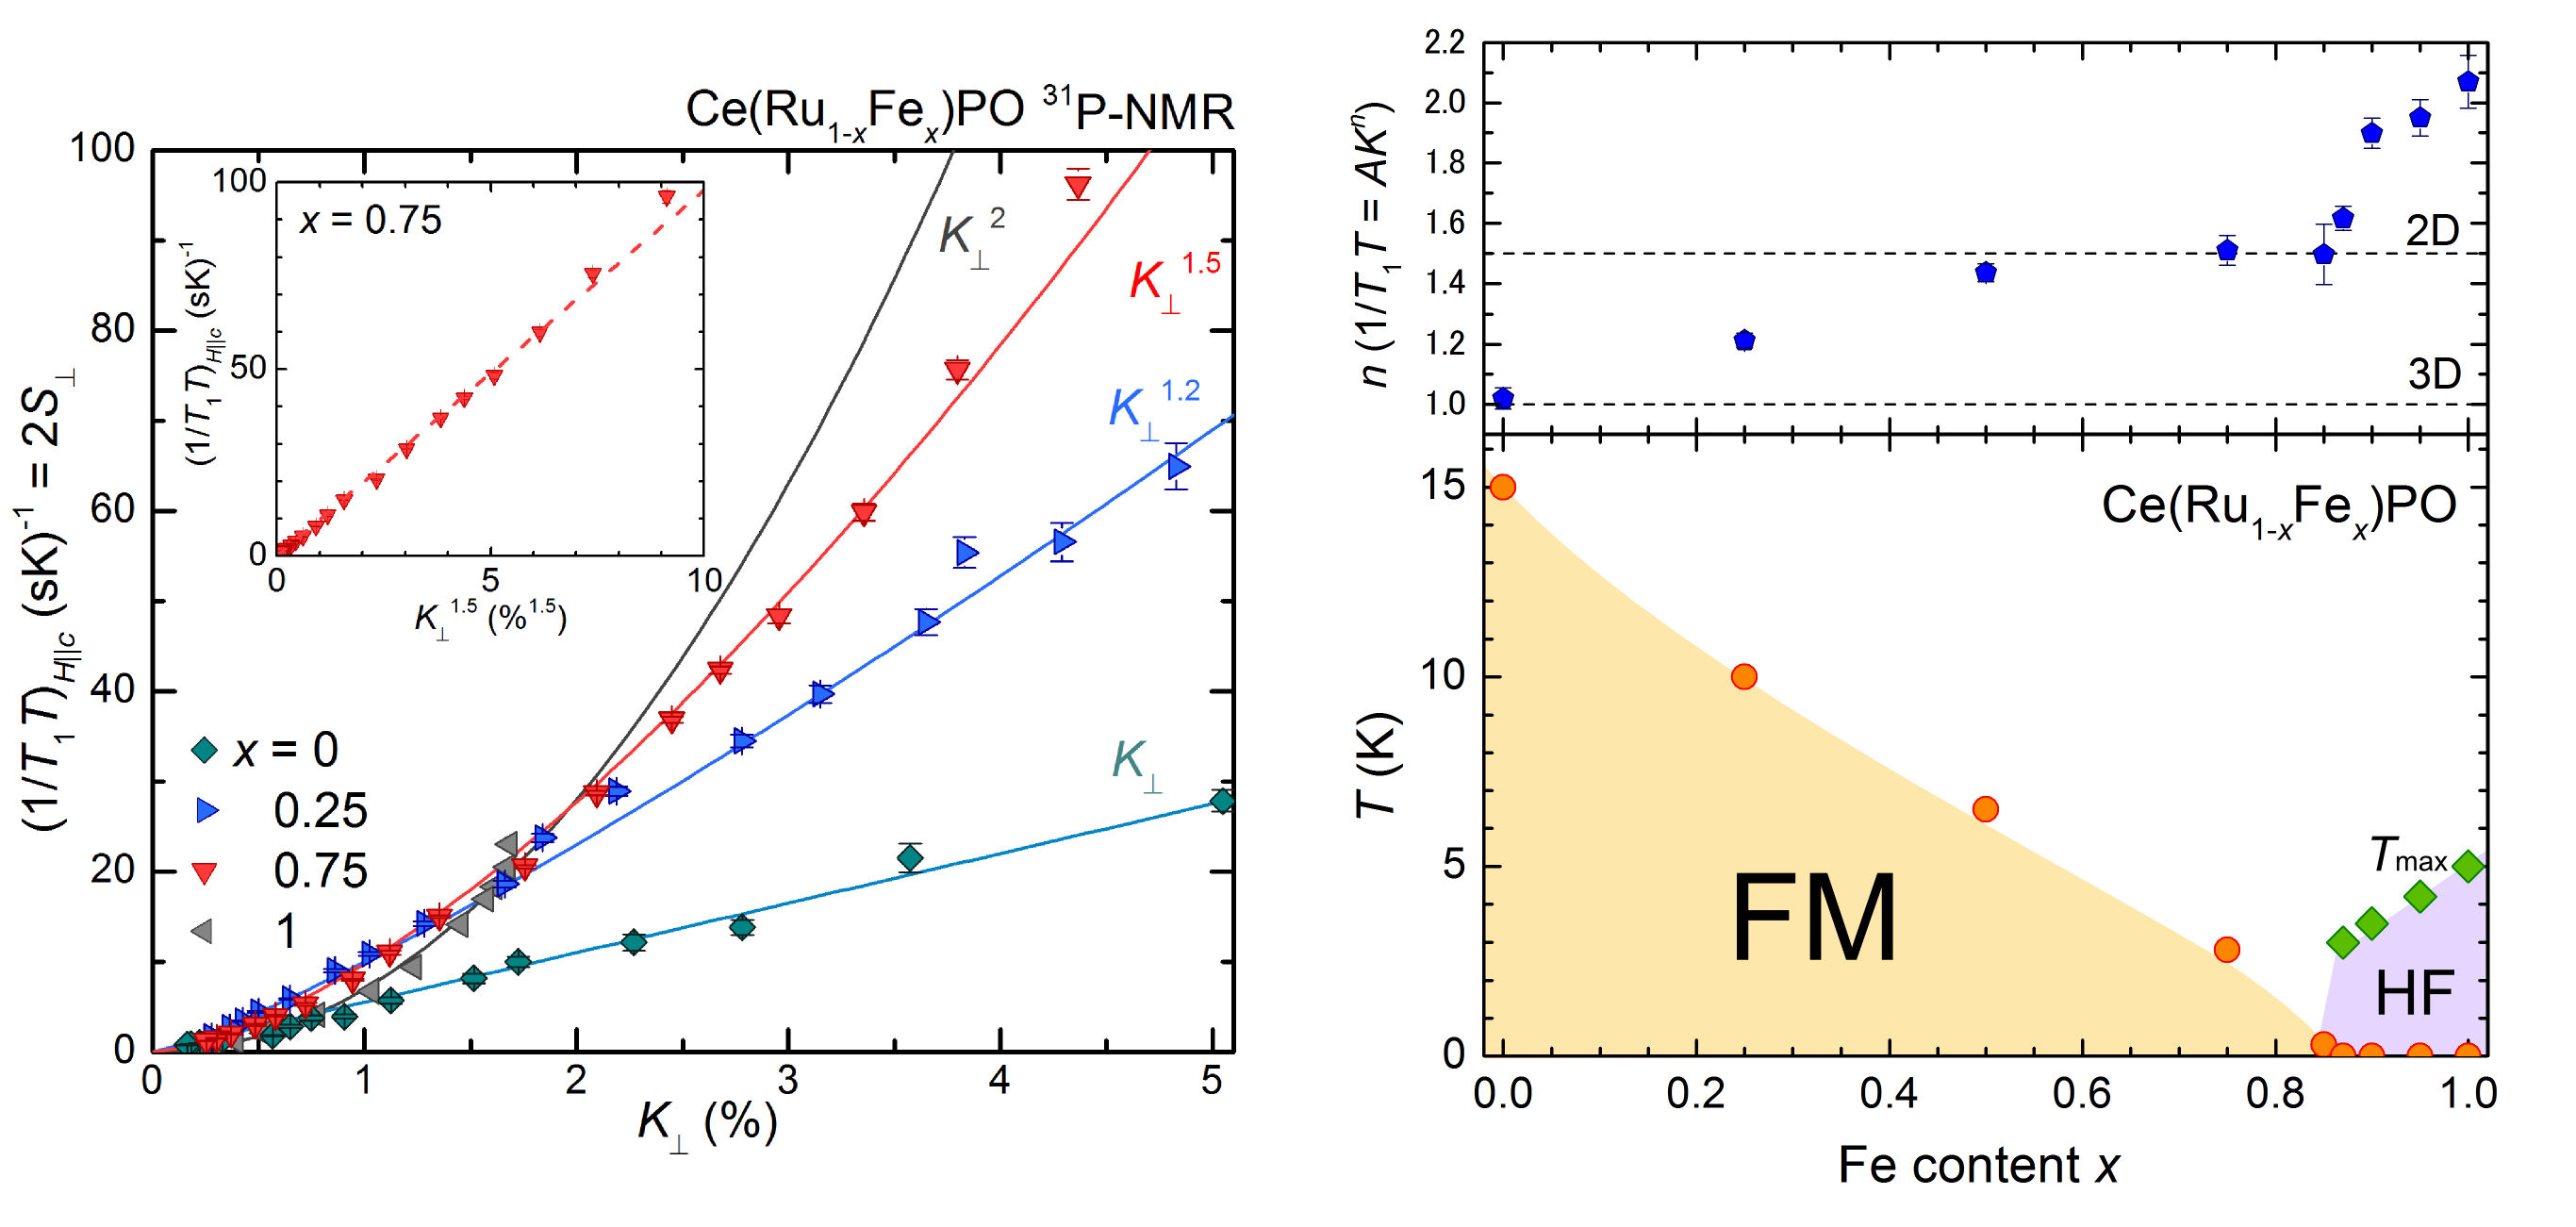 NMR results and a phase diagram of Ce(RuFe)PO